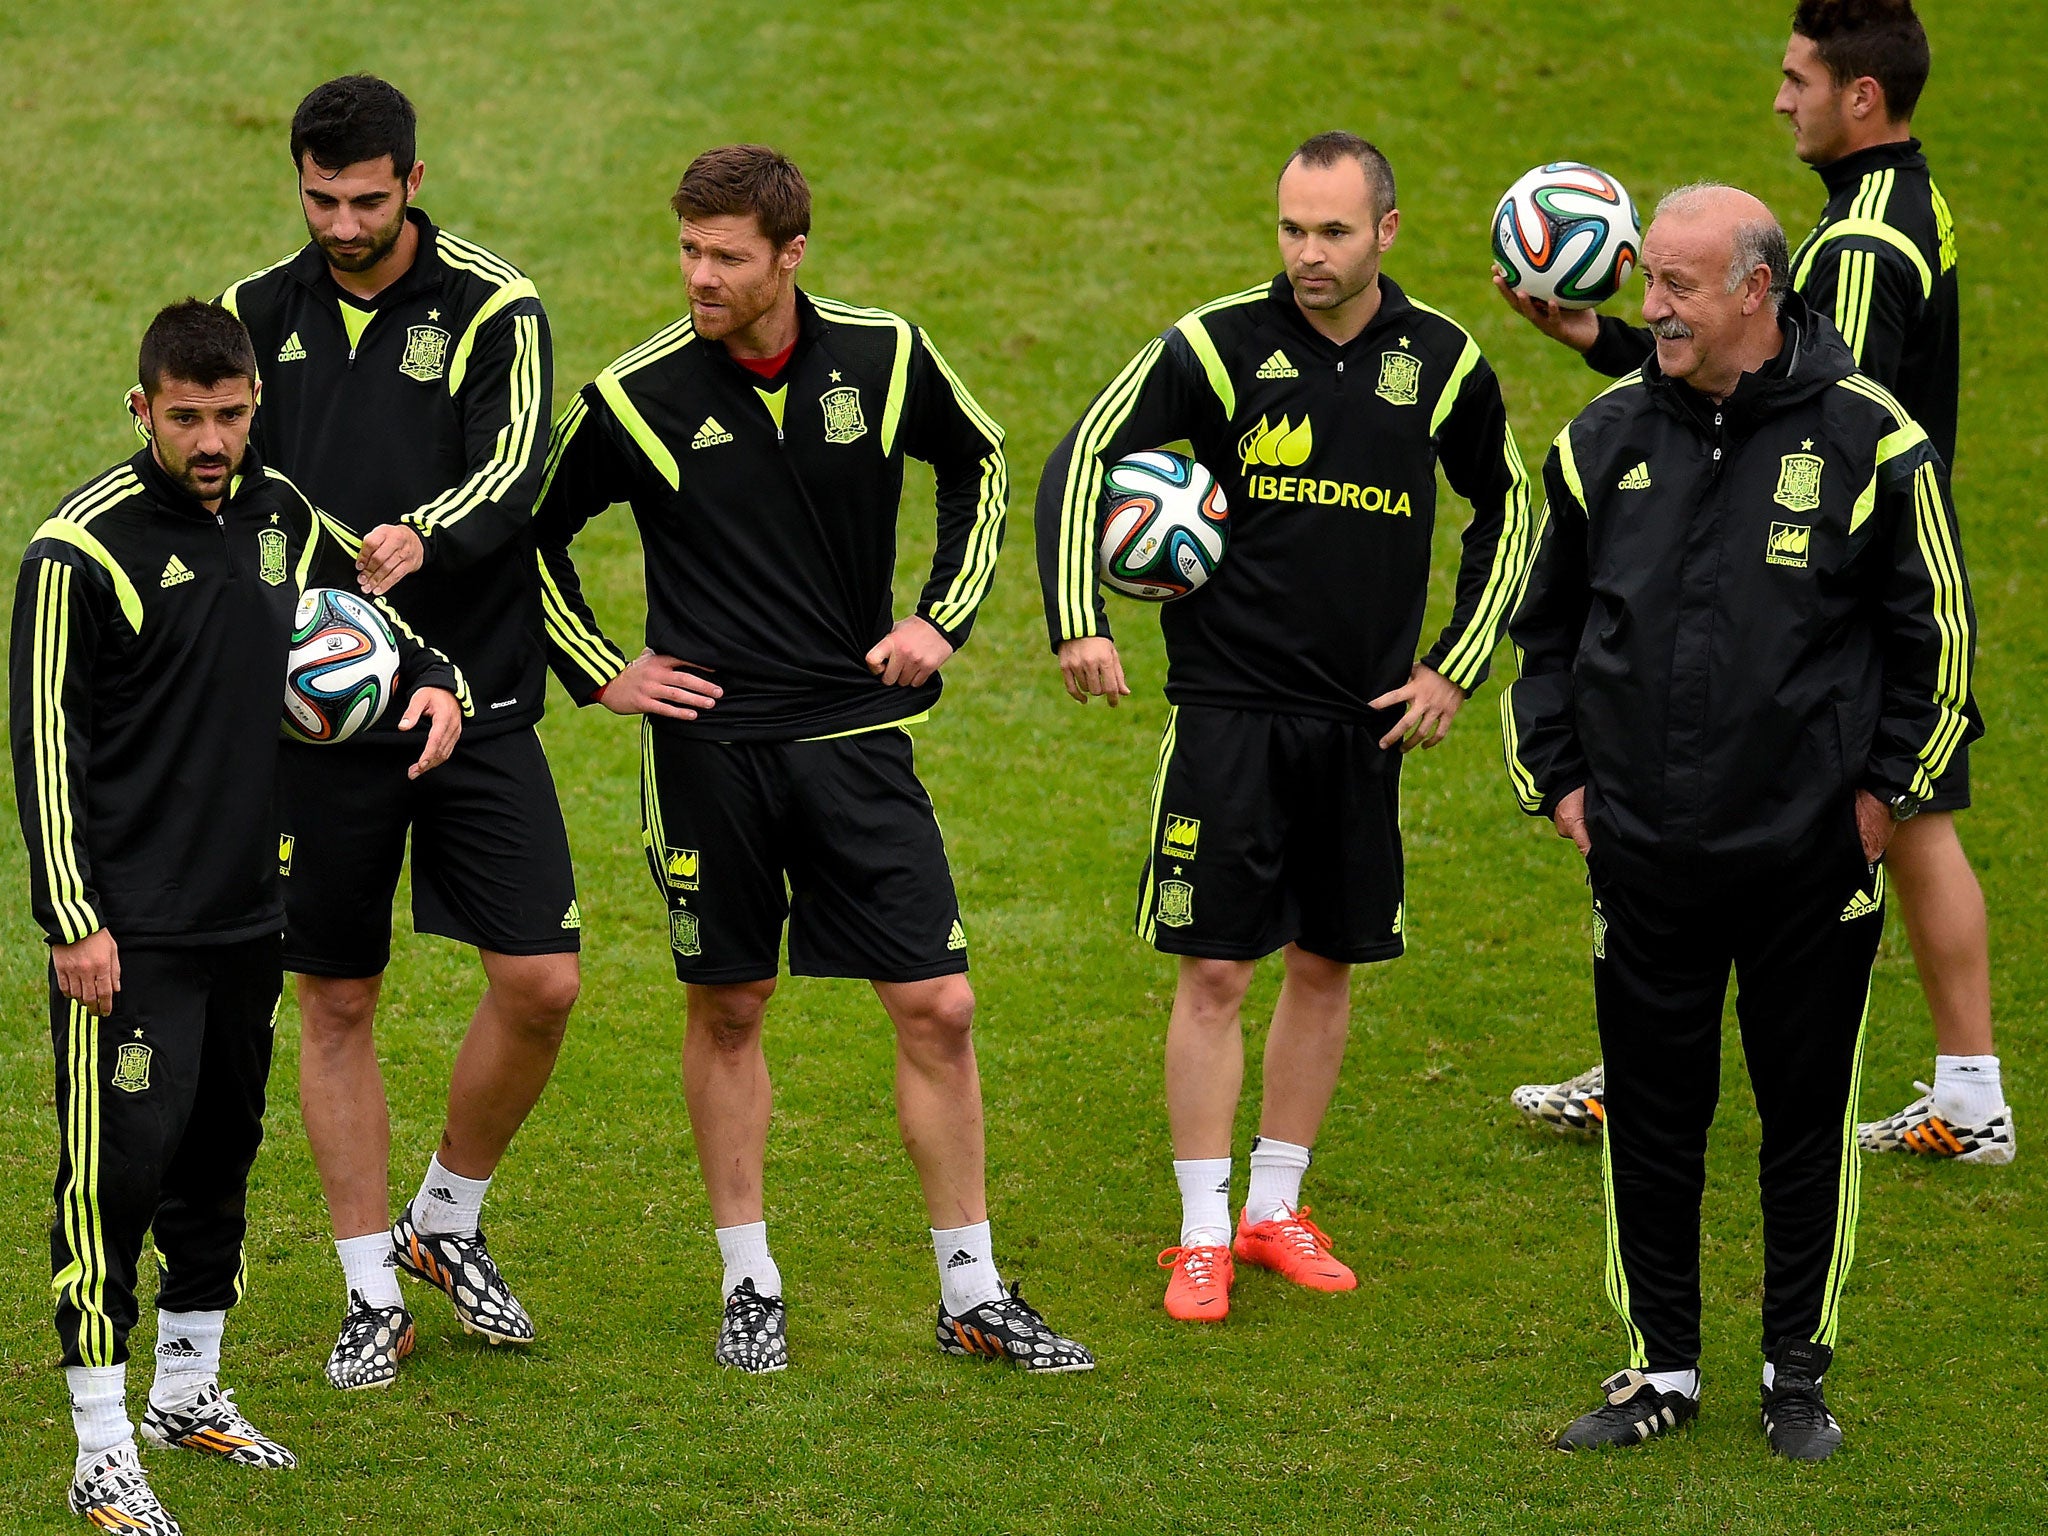 Vicente del Bosque and the Spanish squad face a tough test in the opener against the Netherlands